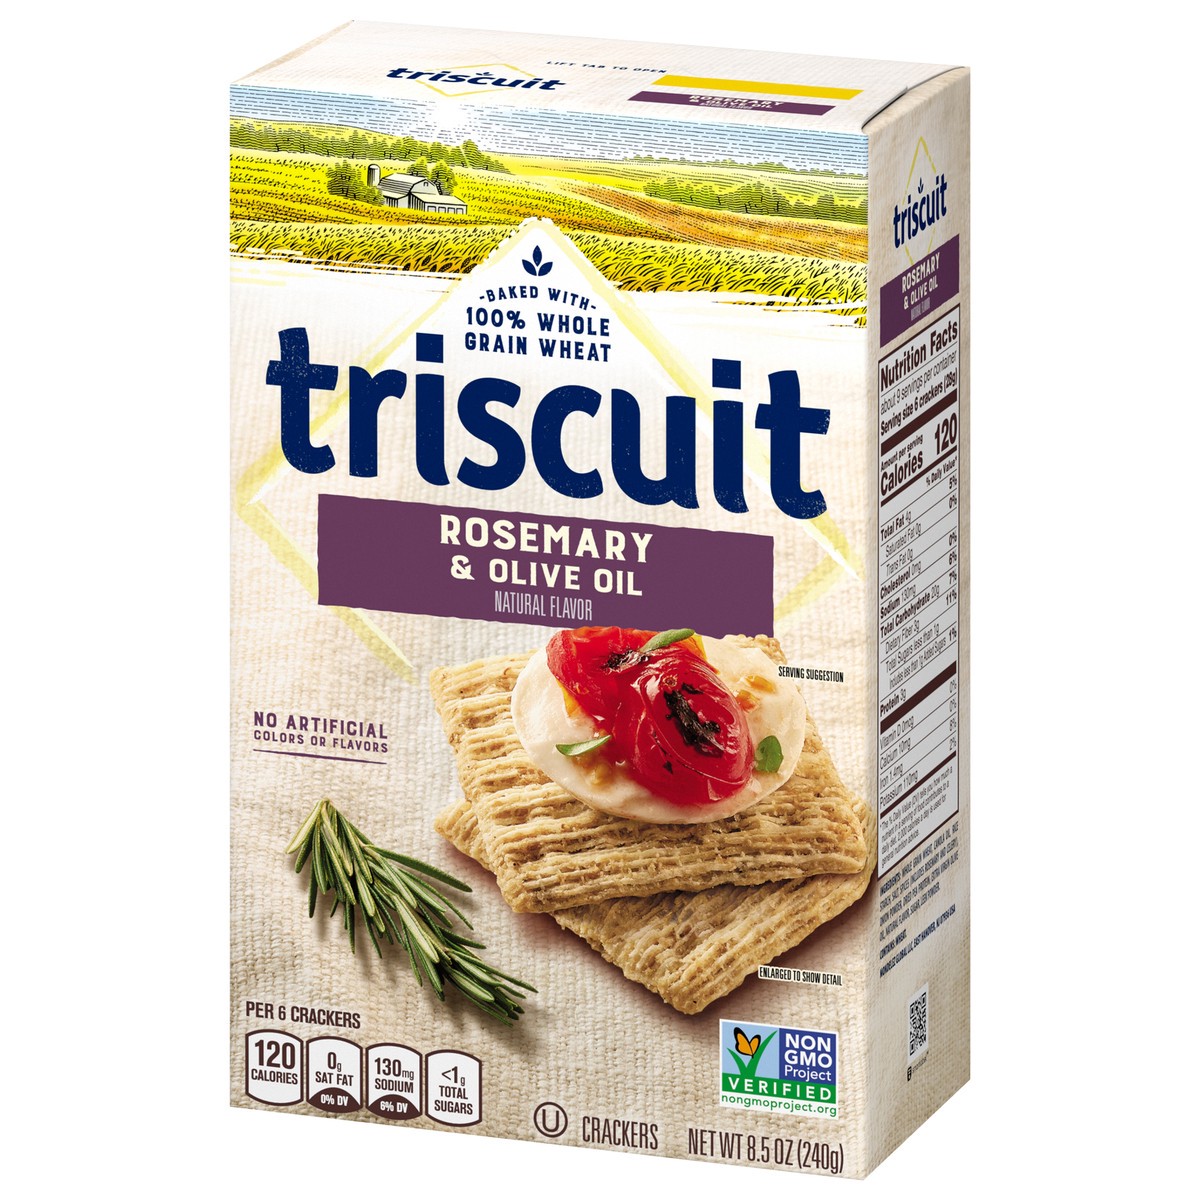 slide 4 of 9, Triscuit Rosemary & Olive Oil Whole Grain Wheat Crackers, 8.5 oz, 8.5 oz